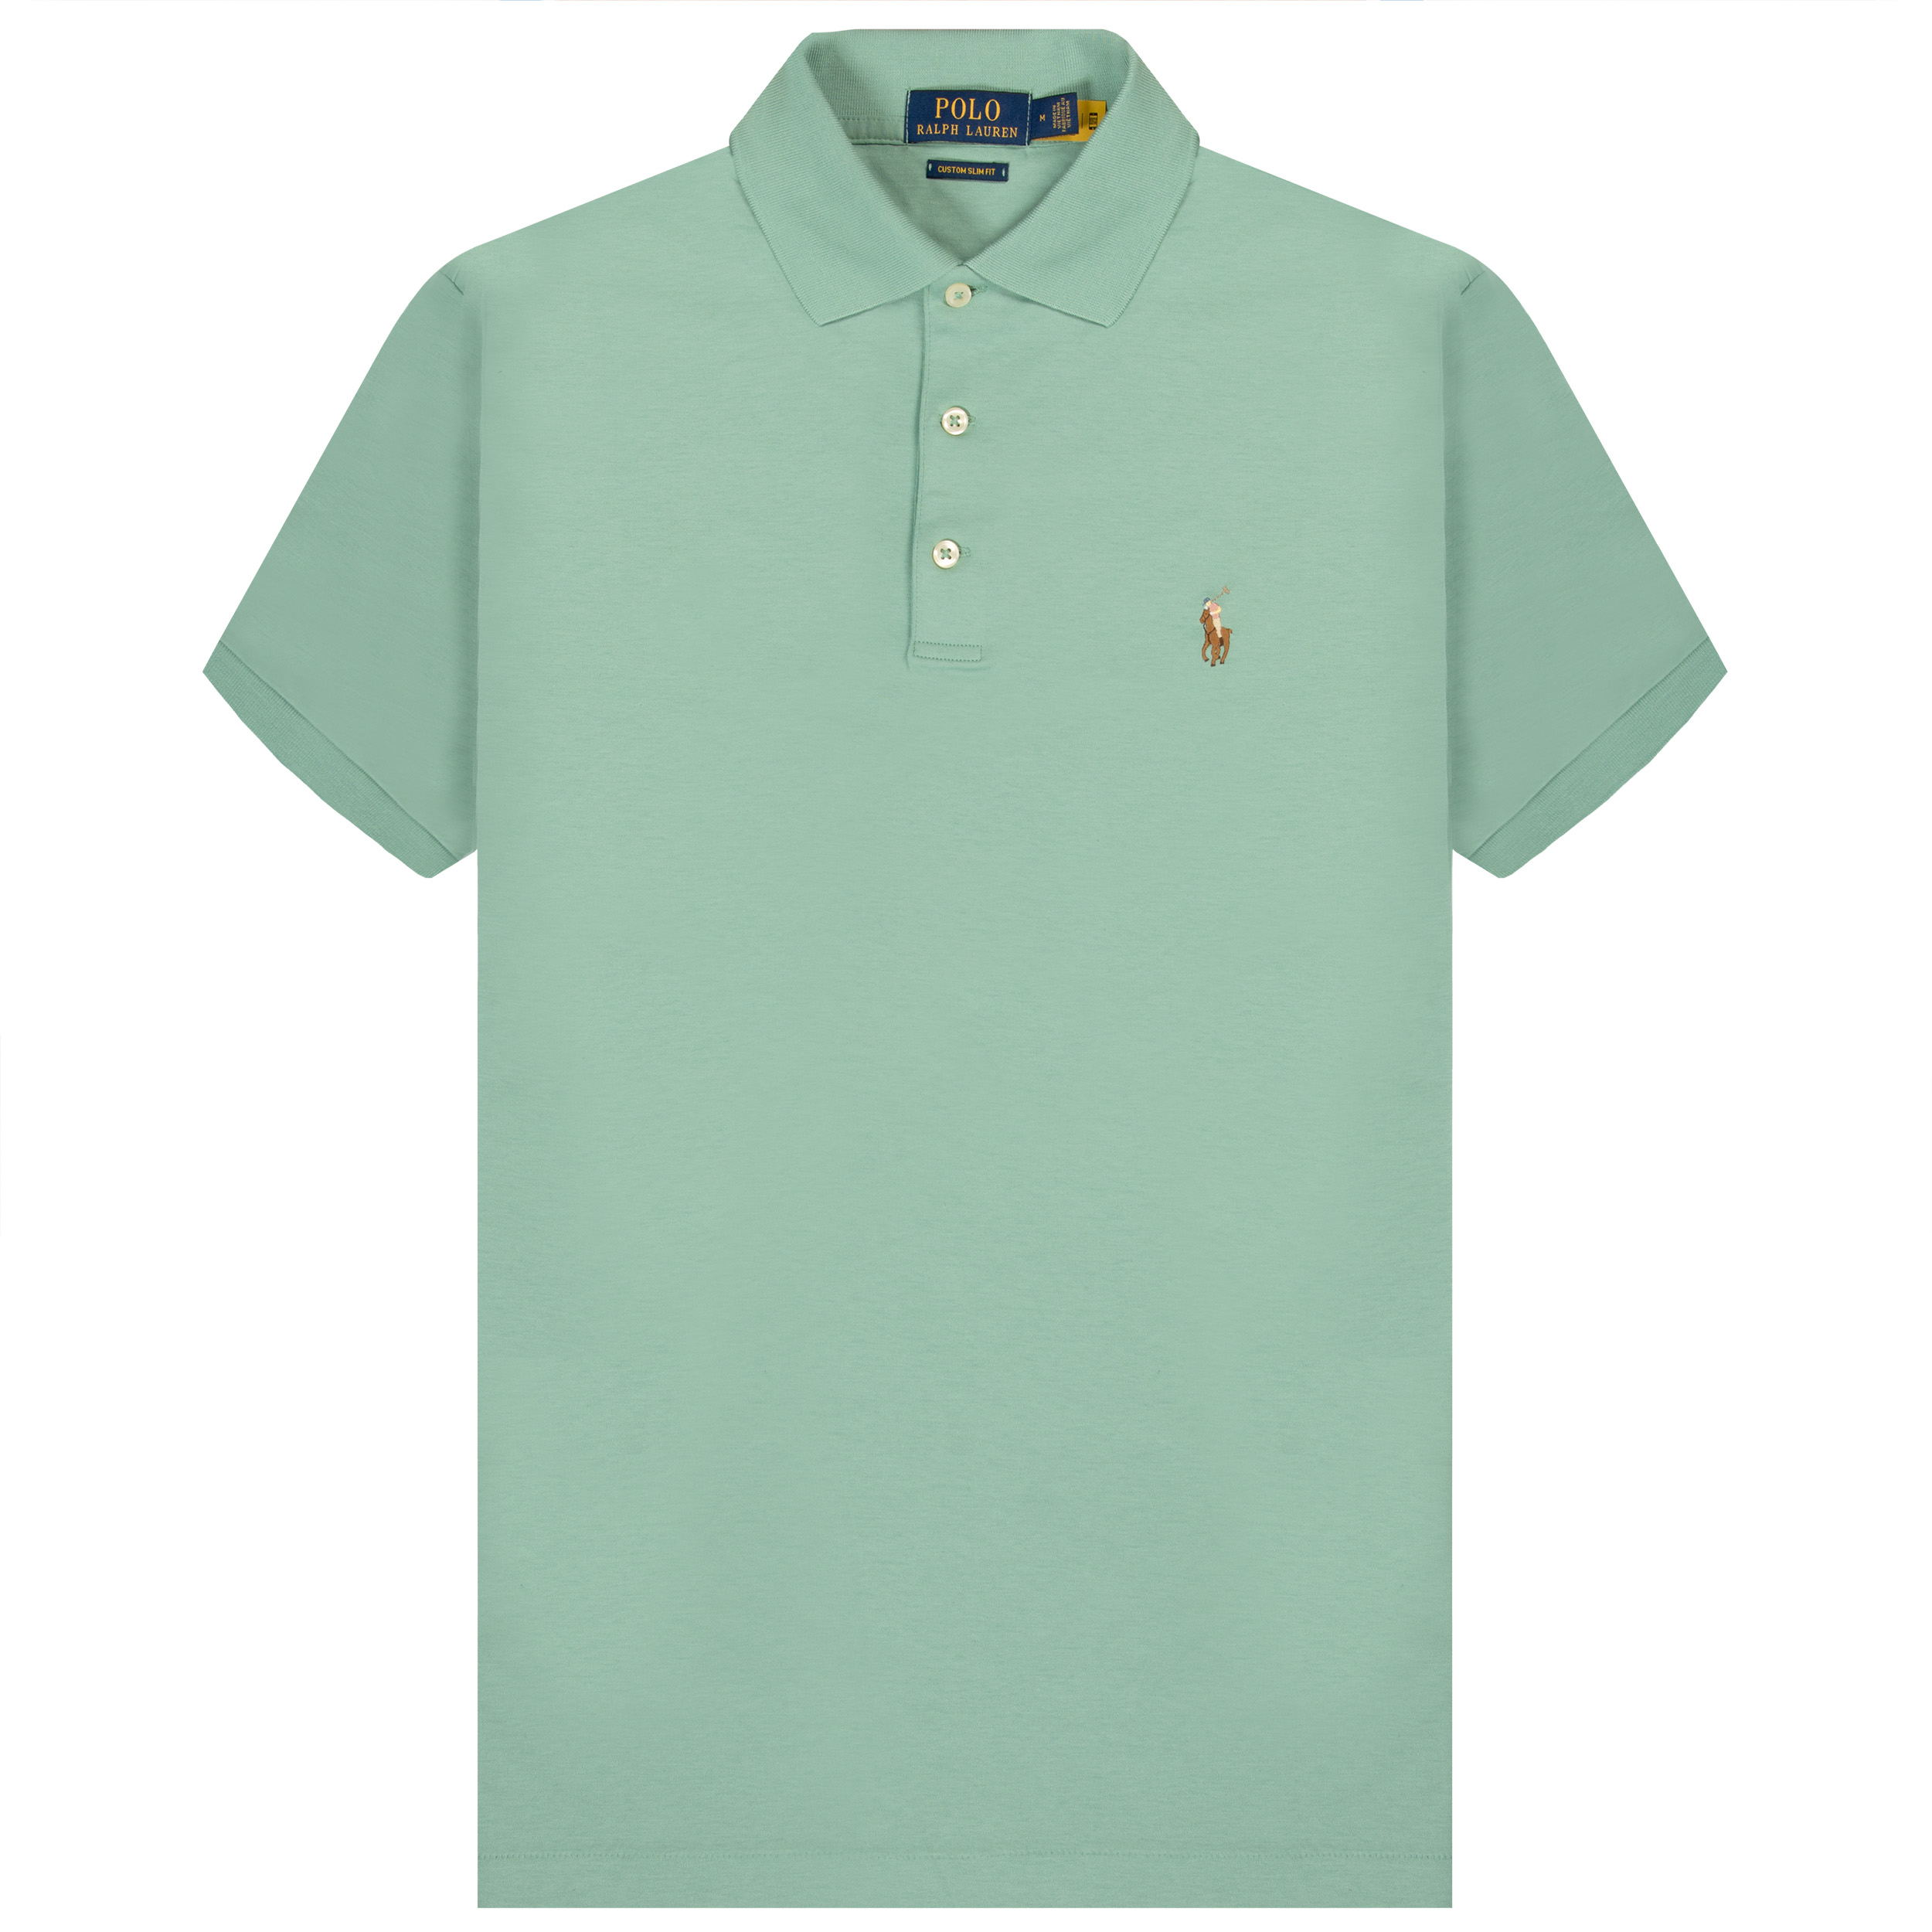 Polo Ralph Lauren Custom Slim Fit Soft Touch Polo Essex Green